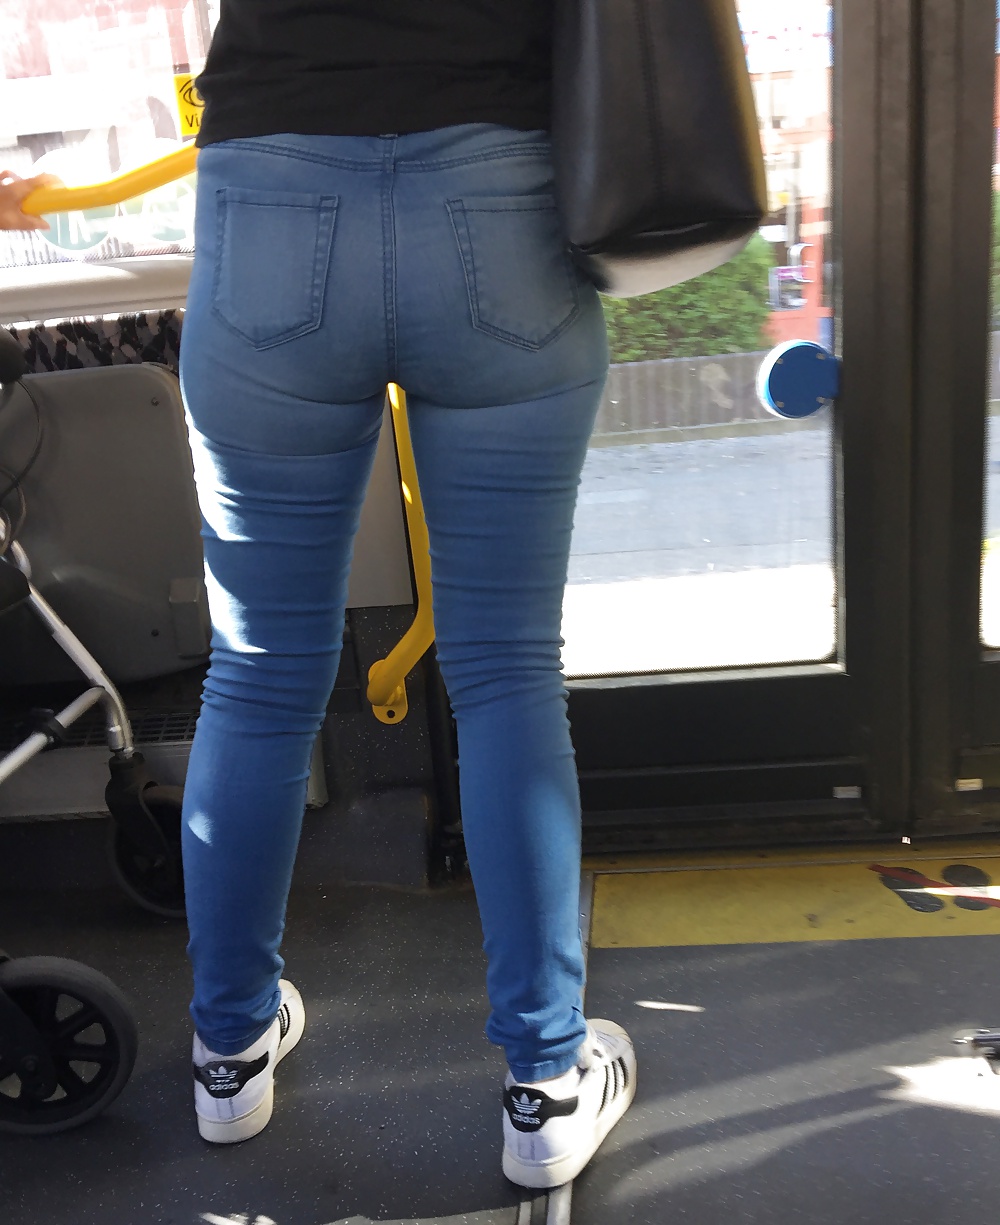 Sexy_Ass_in_tight_Jeans_-_Berlin_Bus (6/8)